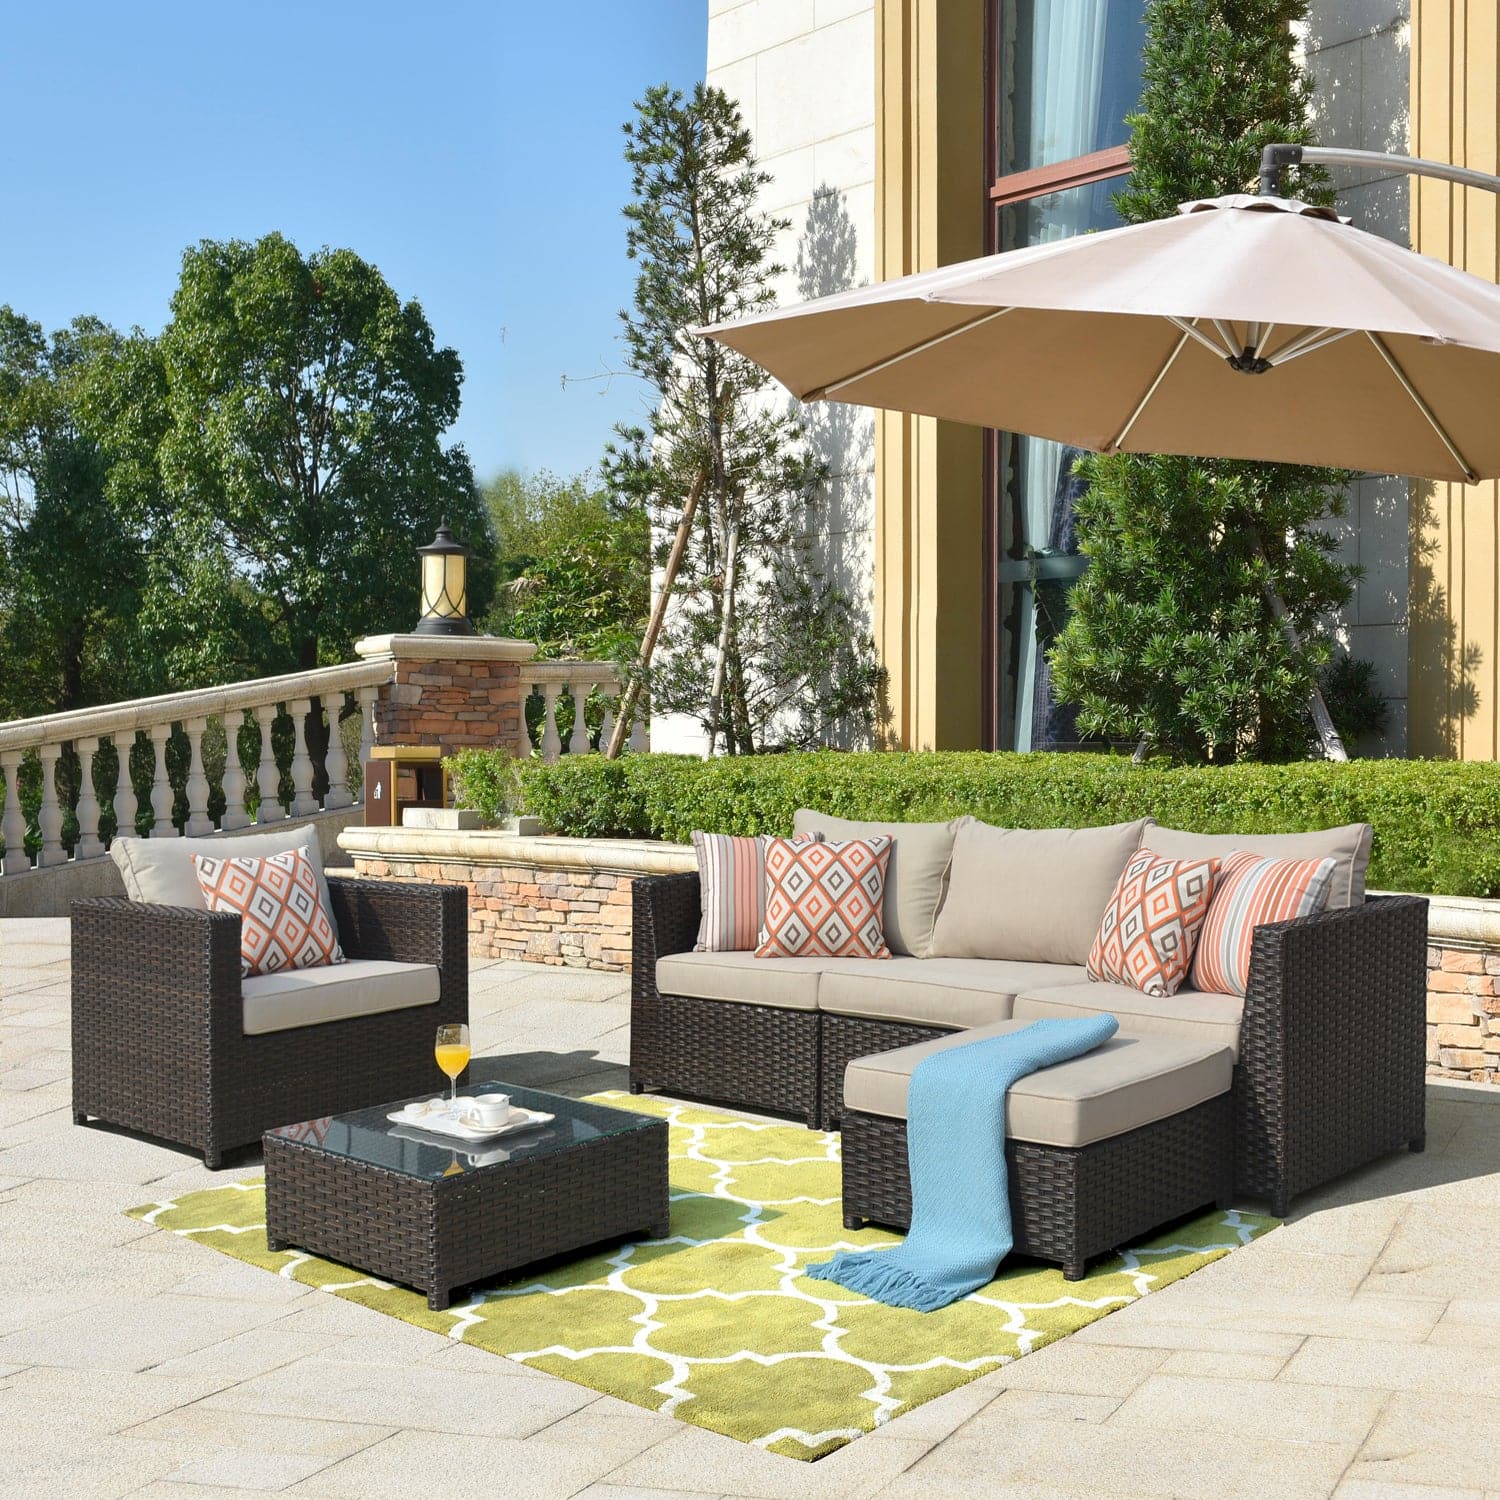 Ovios Patio Furniture Set Bigger Size 6-Piece, King Series,, No Assembly Required